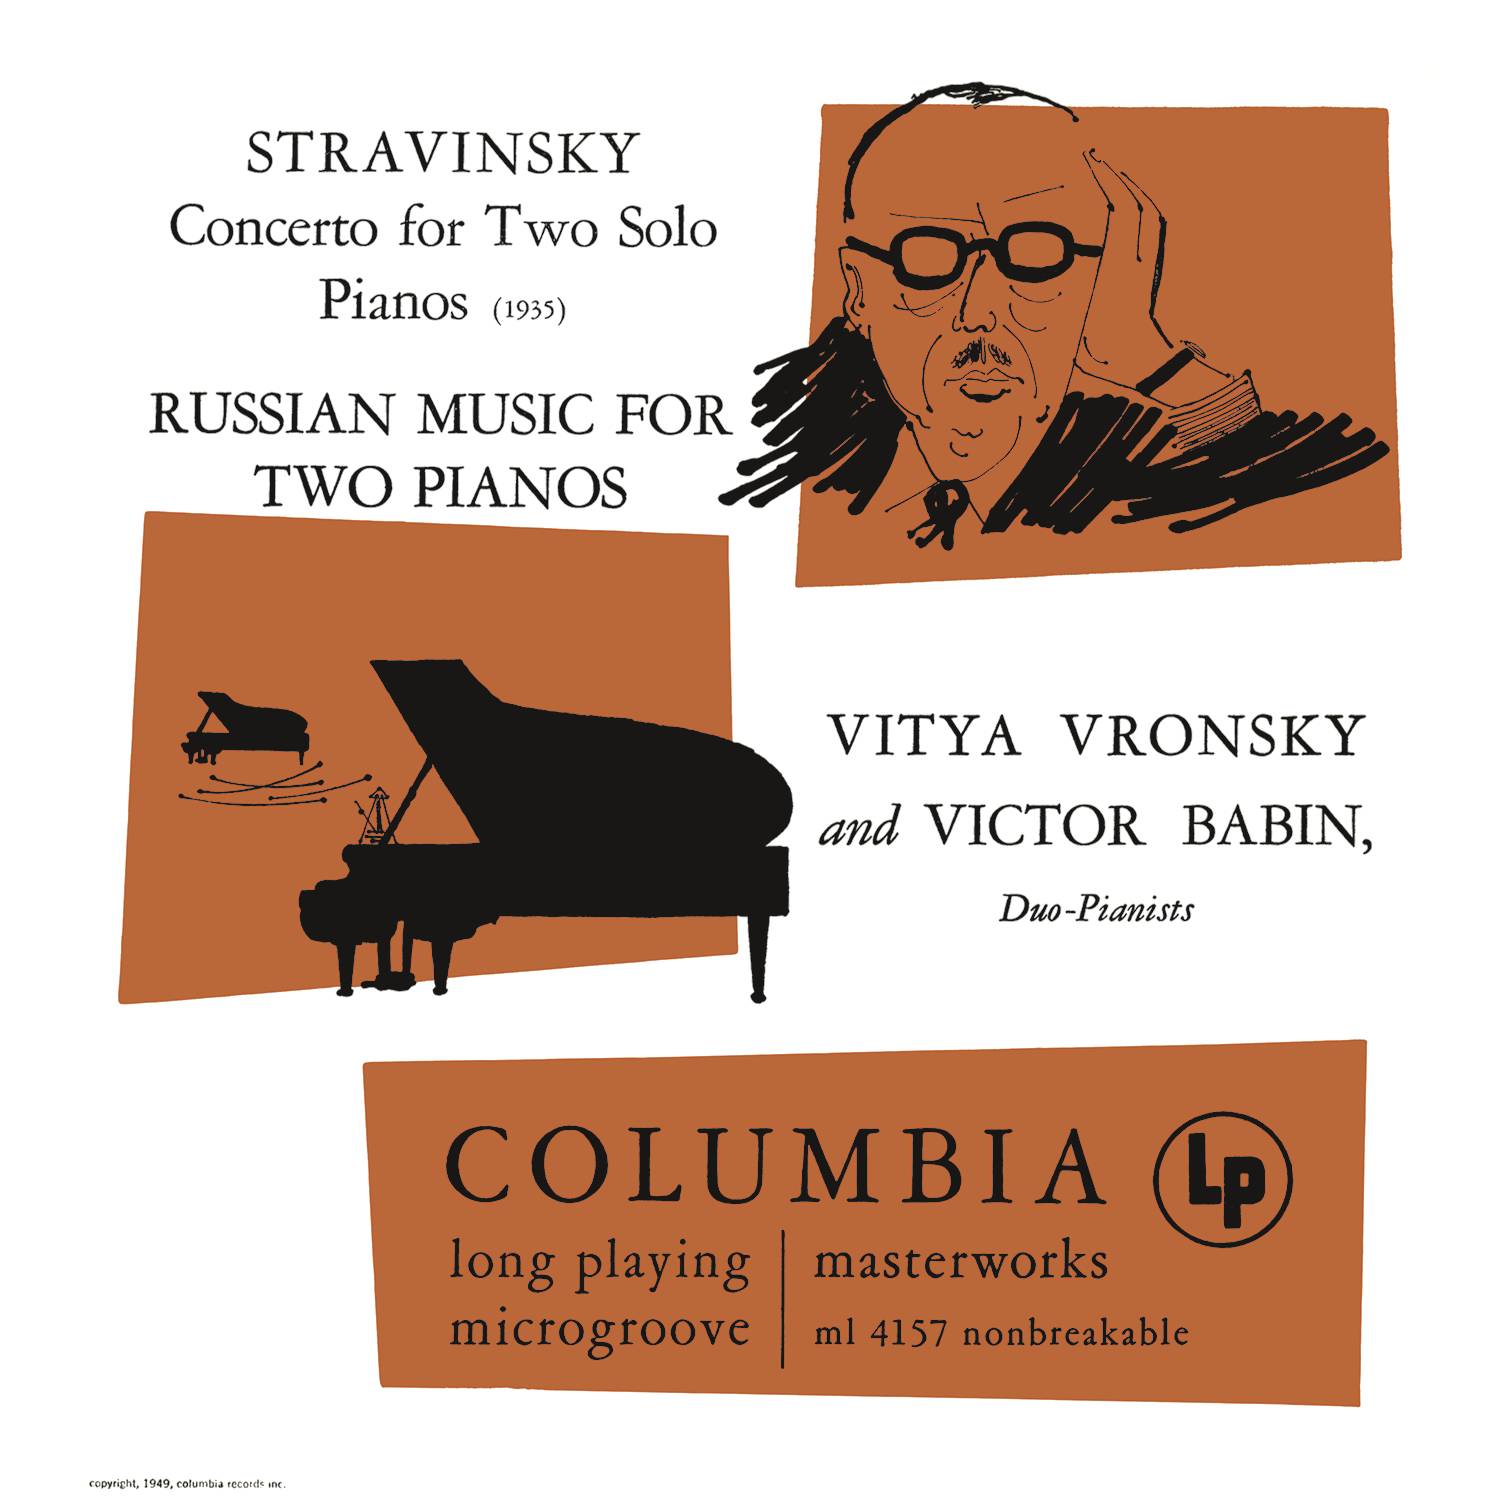 Stravinsky: Concerto for Two Solo Pianos - Russian Music for Two Pianos